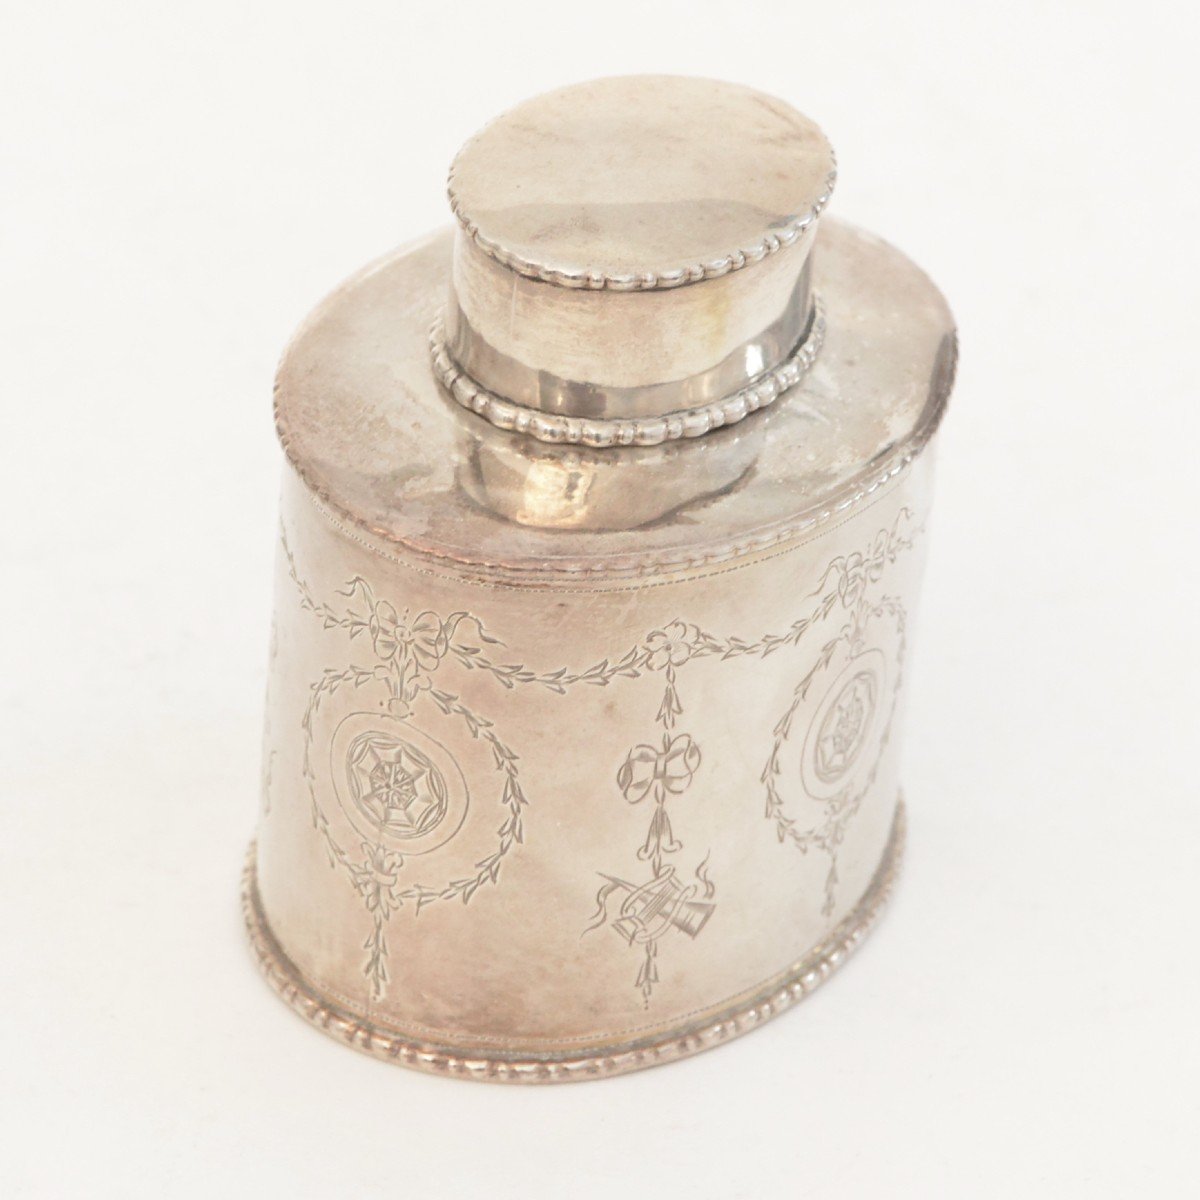 Miniature English Sterling Silver Tea Caddy By George Nathan And Ridley Hayes Chester 1909-photo-1